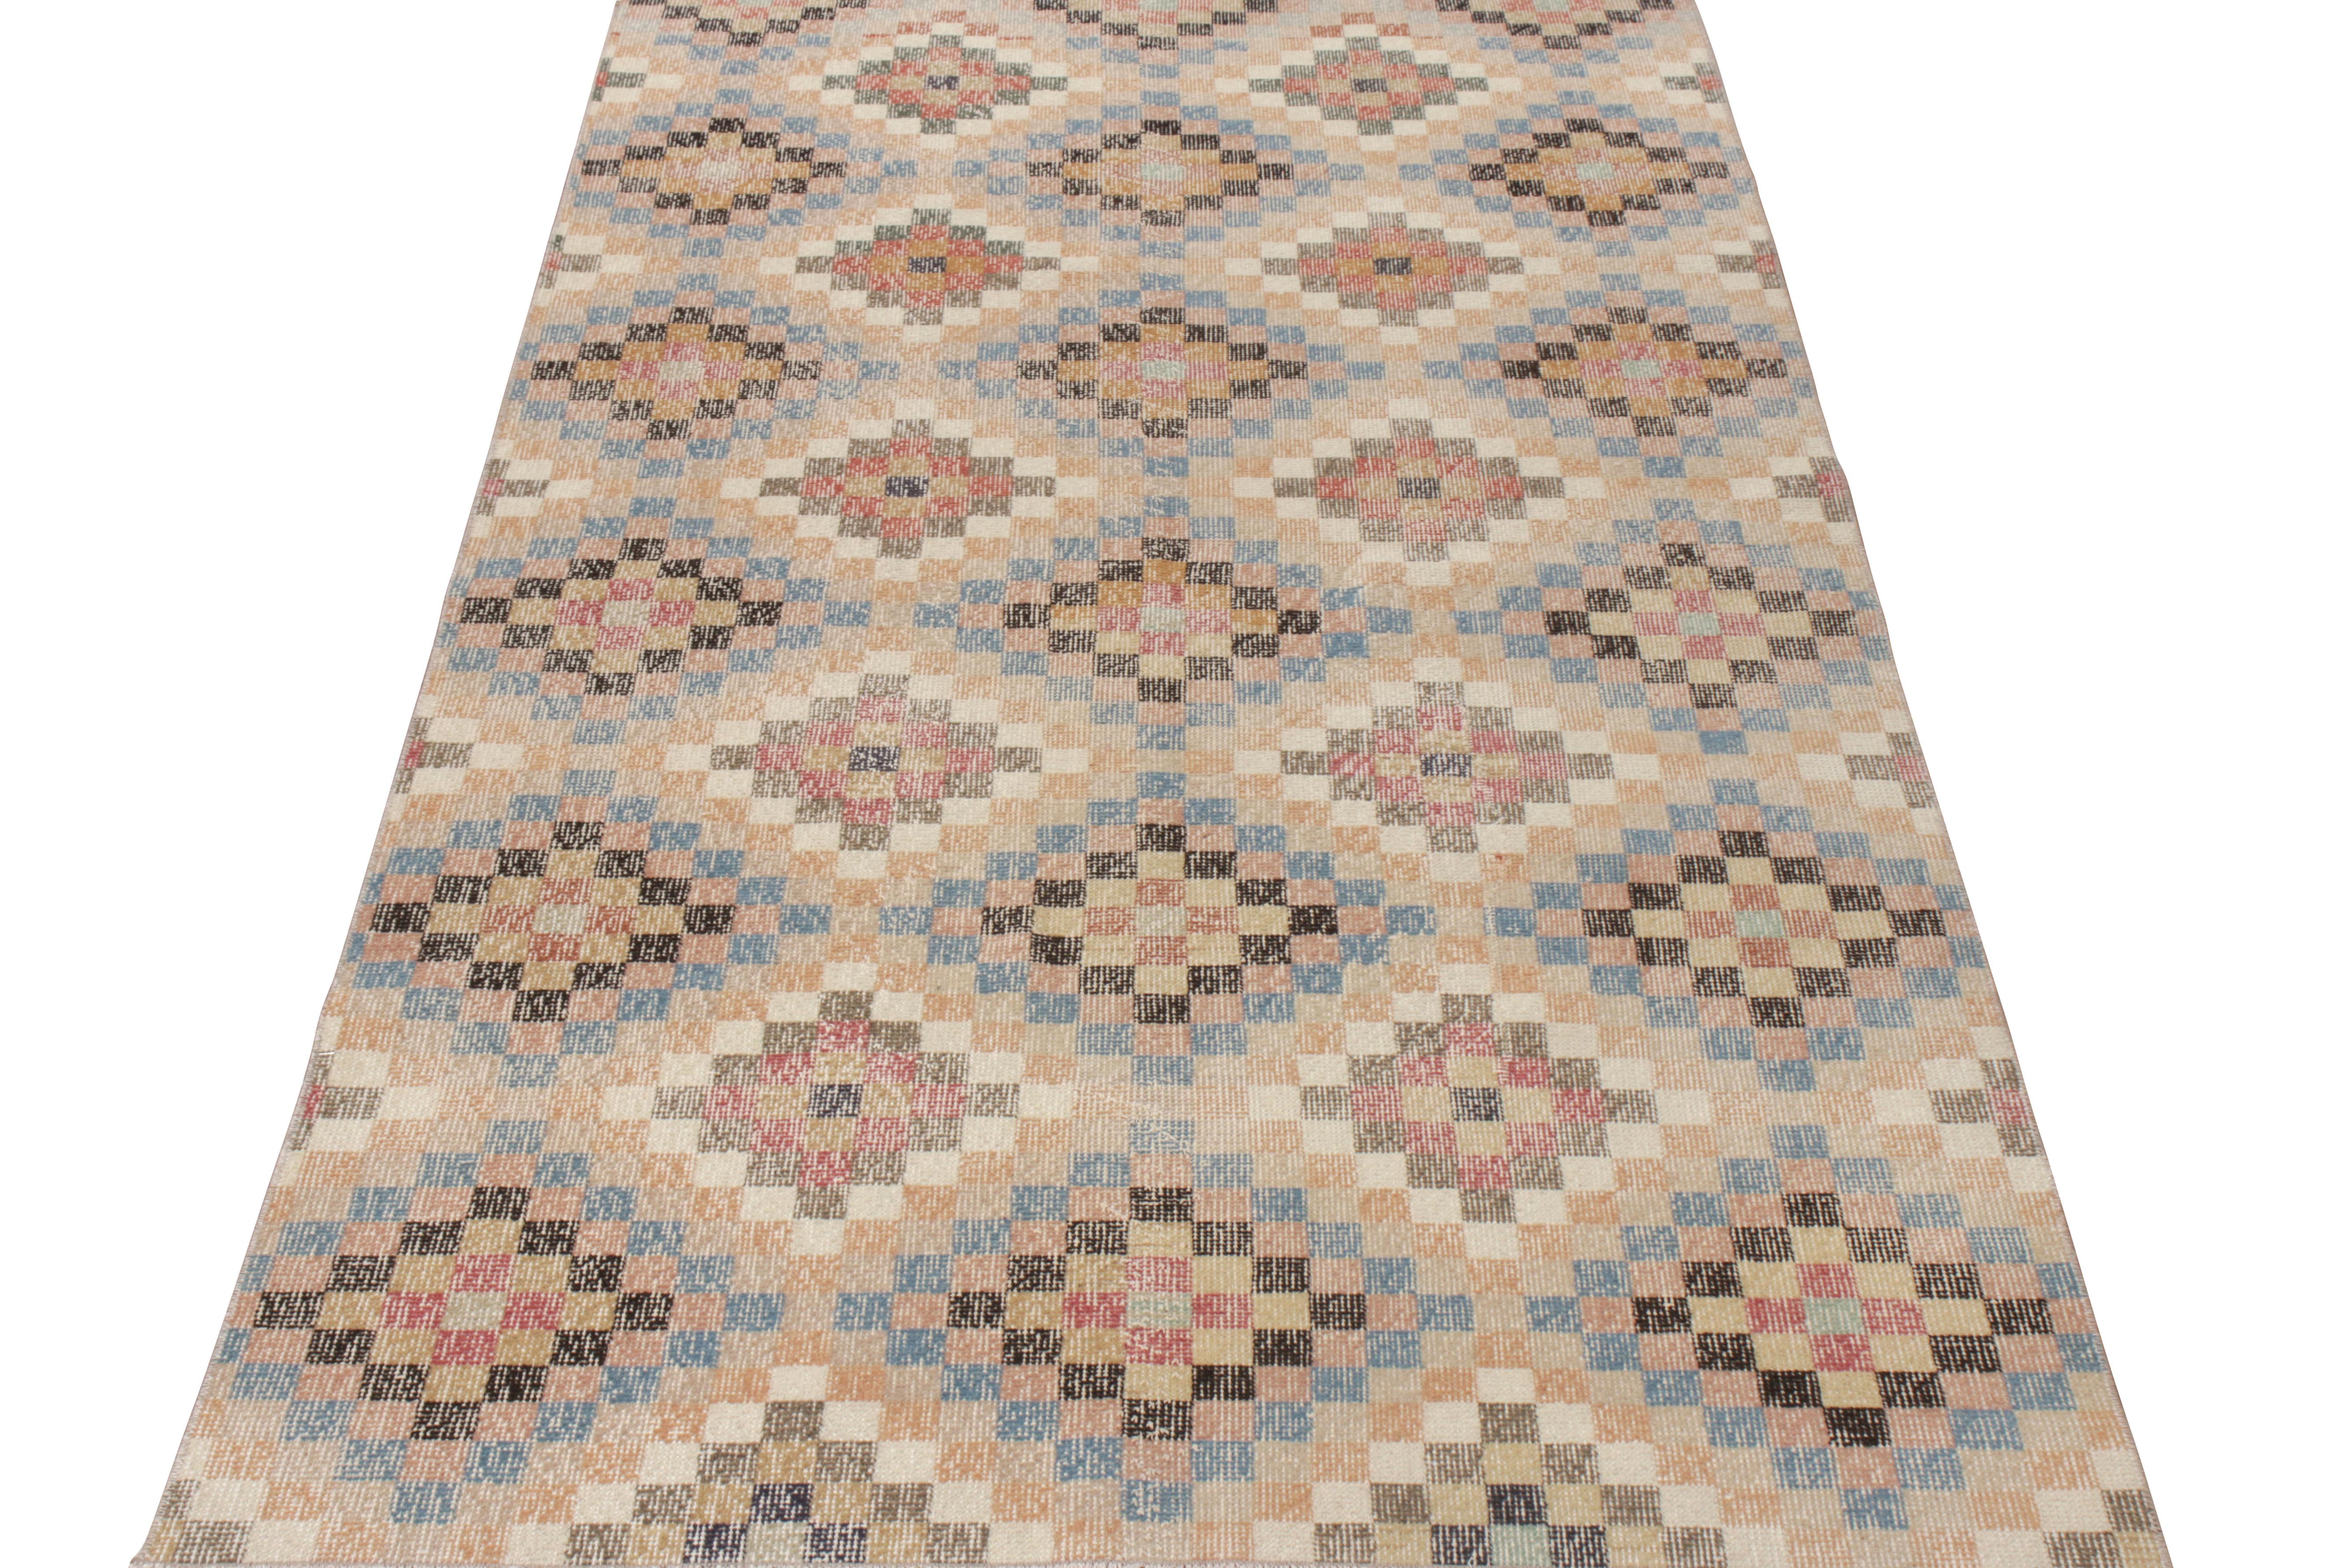 Hand-knotted in wool originating from Turkey circa 1960-1970, this vintage mid-century rug belongs to Rug & Kilim’s growing Mid-Century Pasha Collection—celebrating the Turkish icon and multidisciplinary designer Zeki Müren with Josh’s hand picked